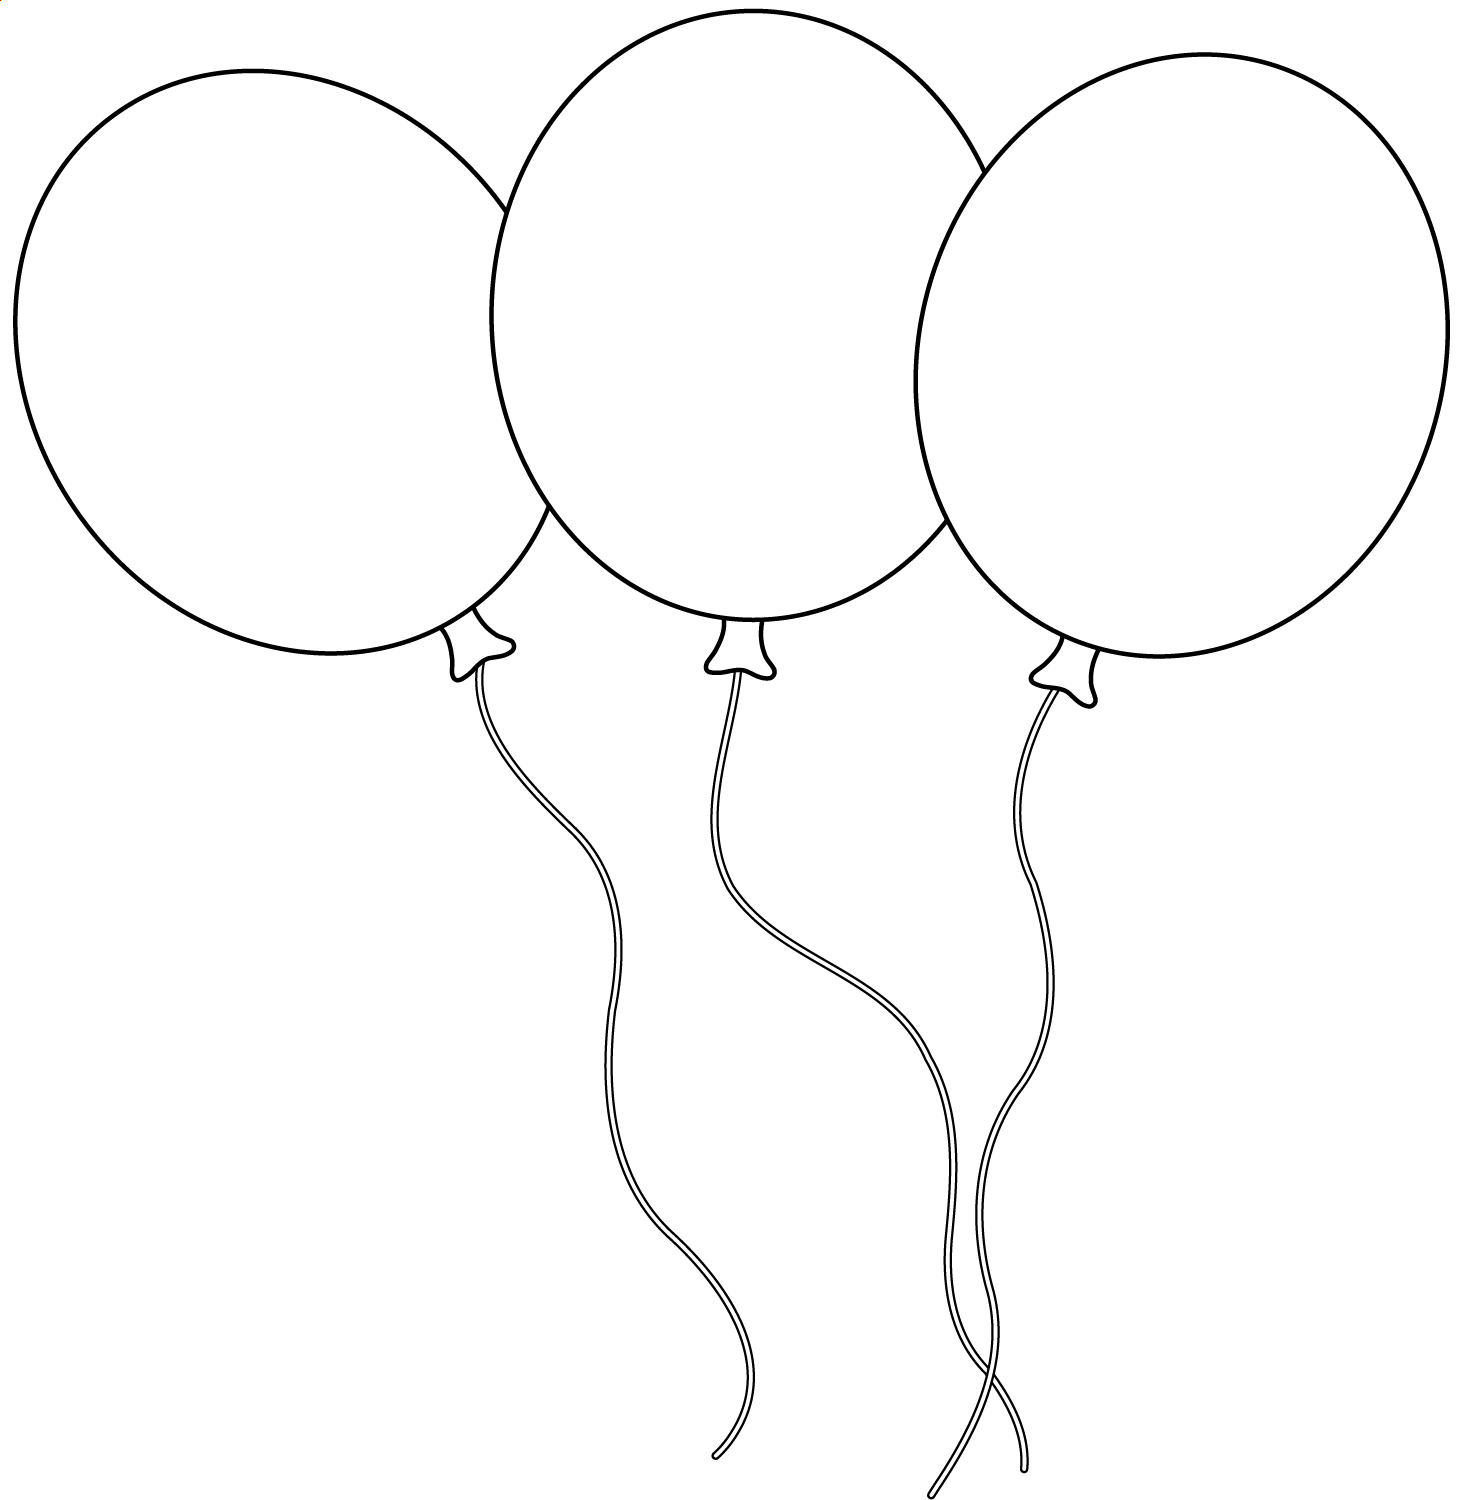 Nice Three Balloons Coloring Page Coloring Page